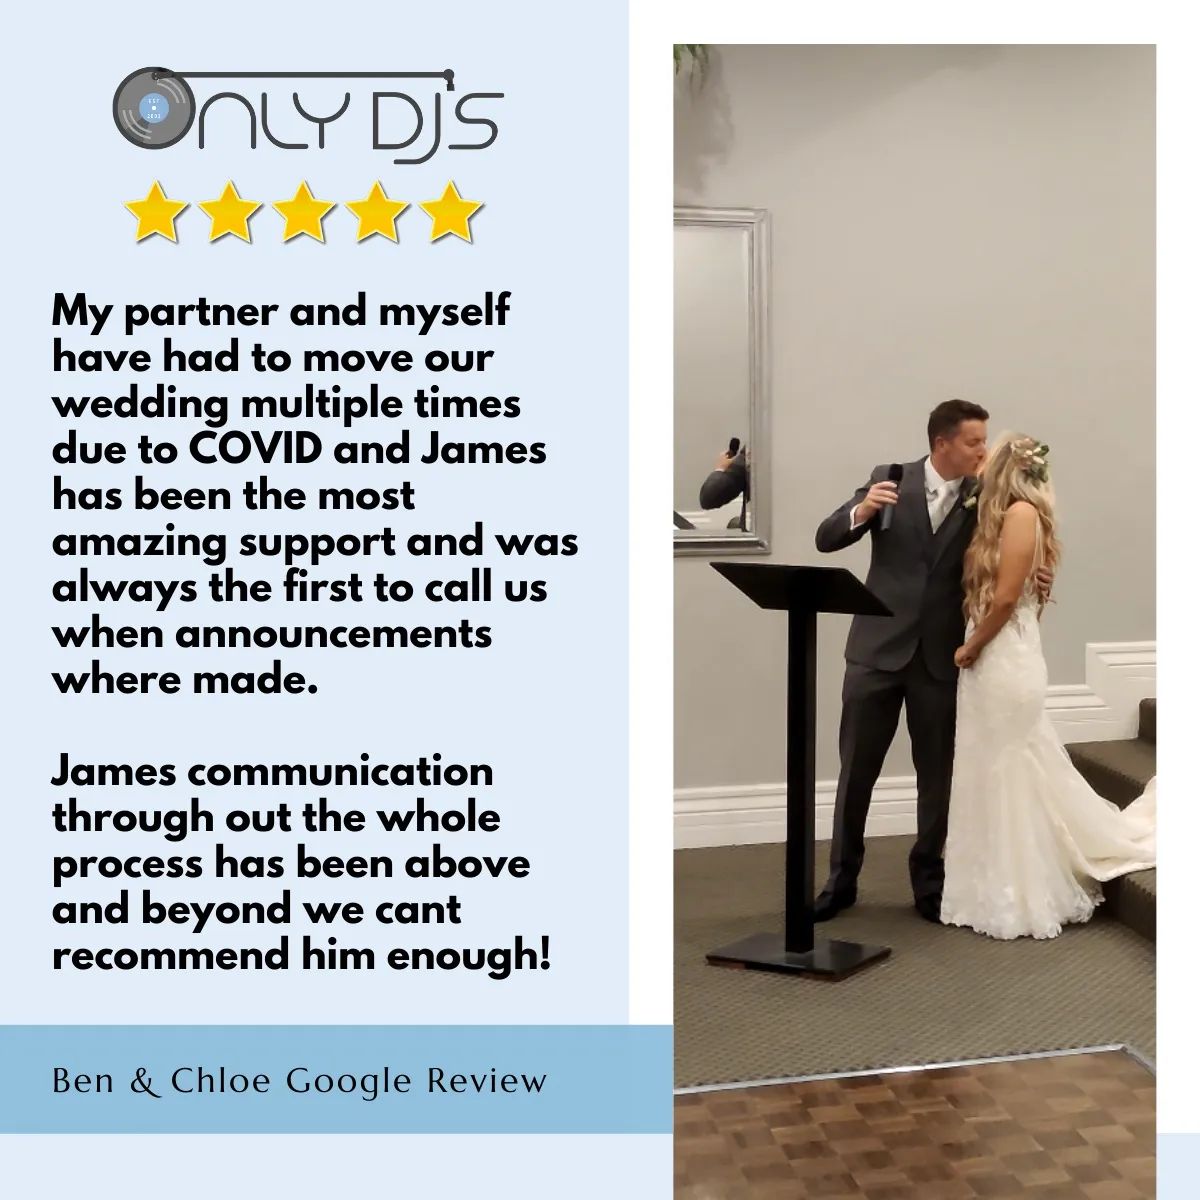 Highly recommended Wedding DJ